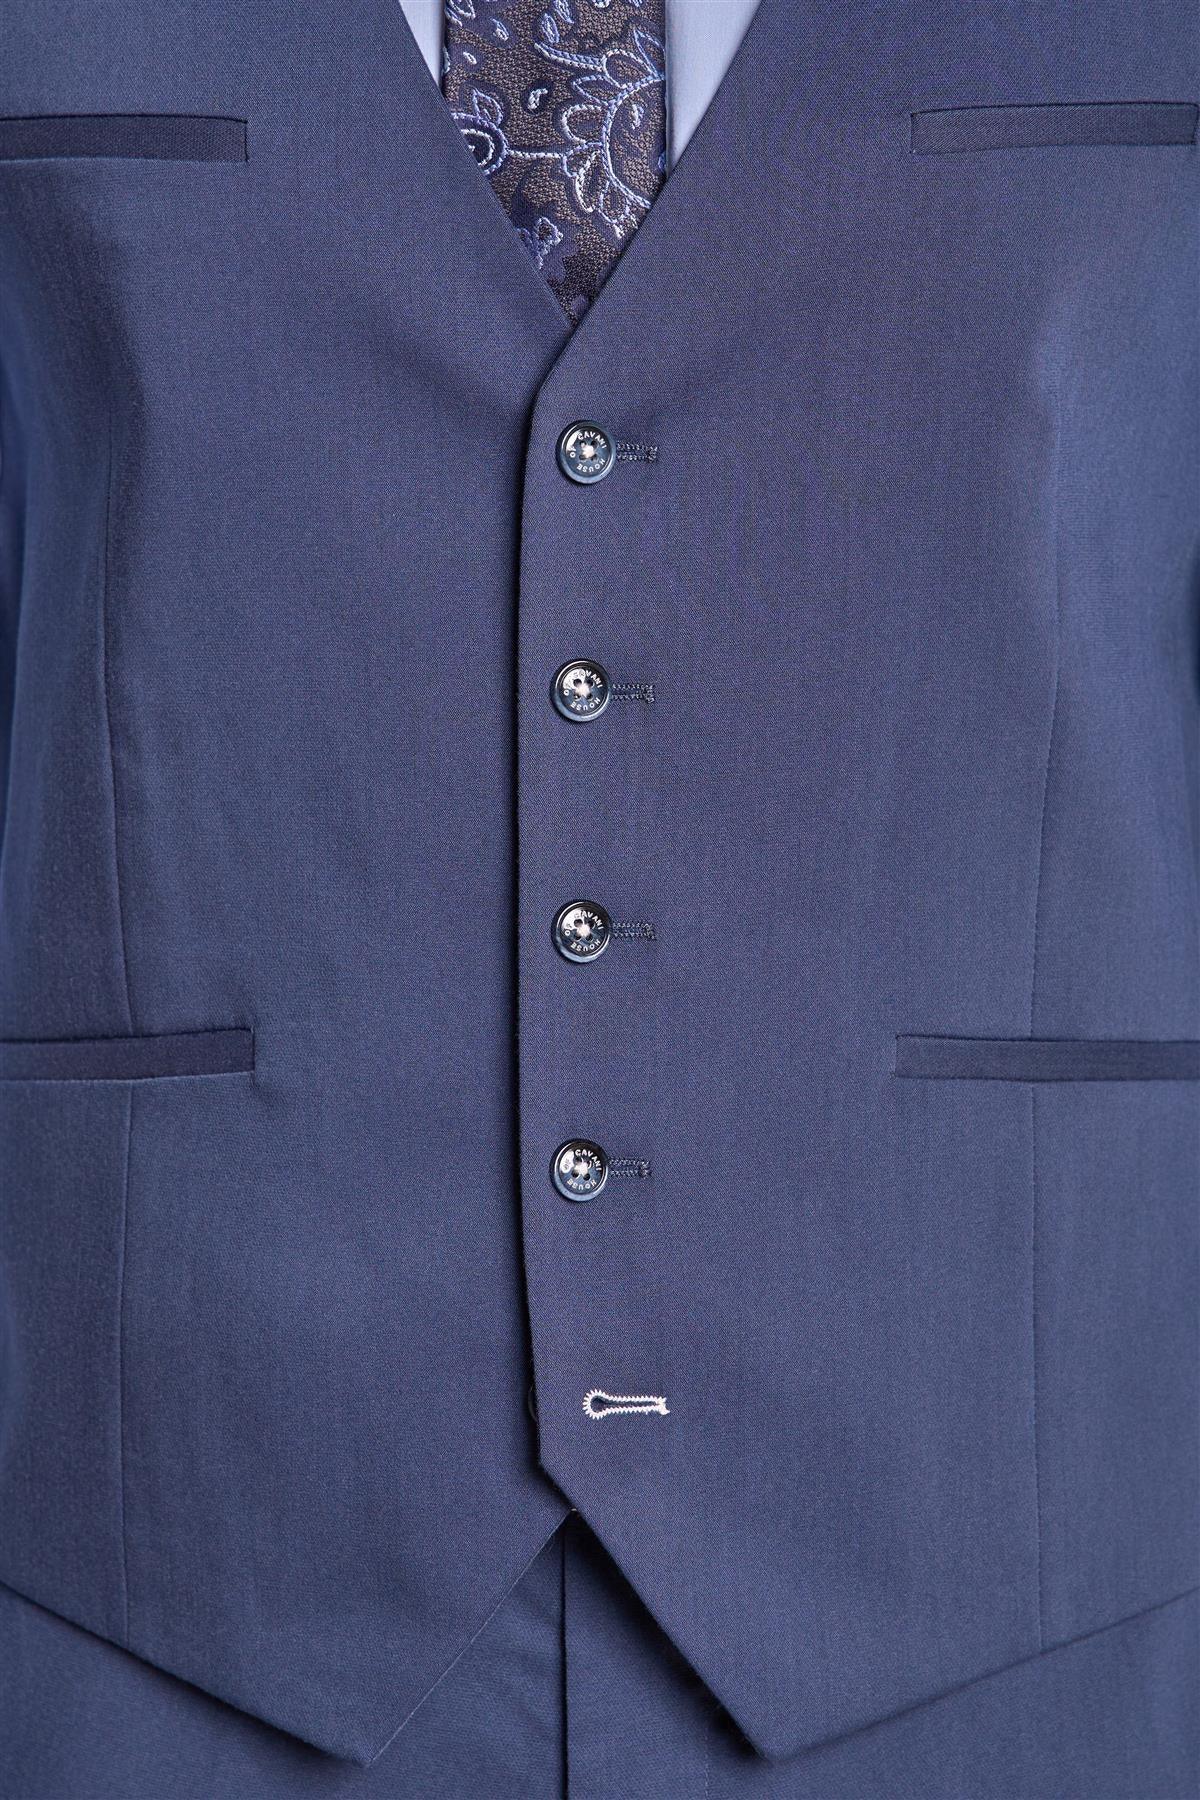 Specter Teal Waistcoat Front Detail